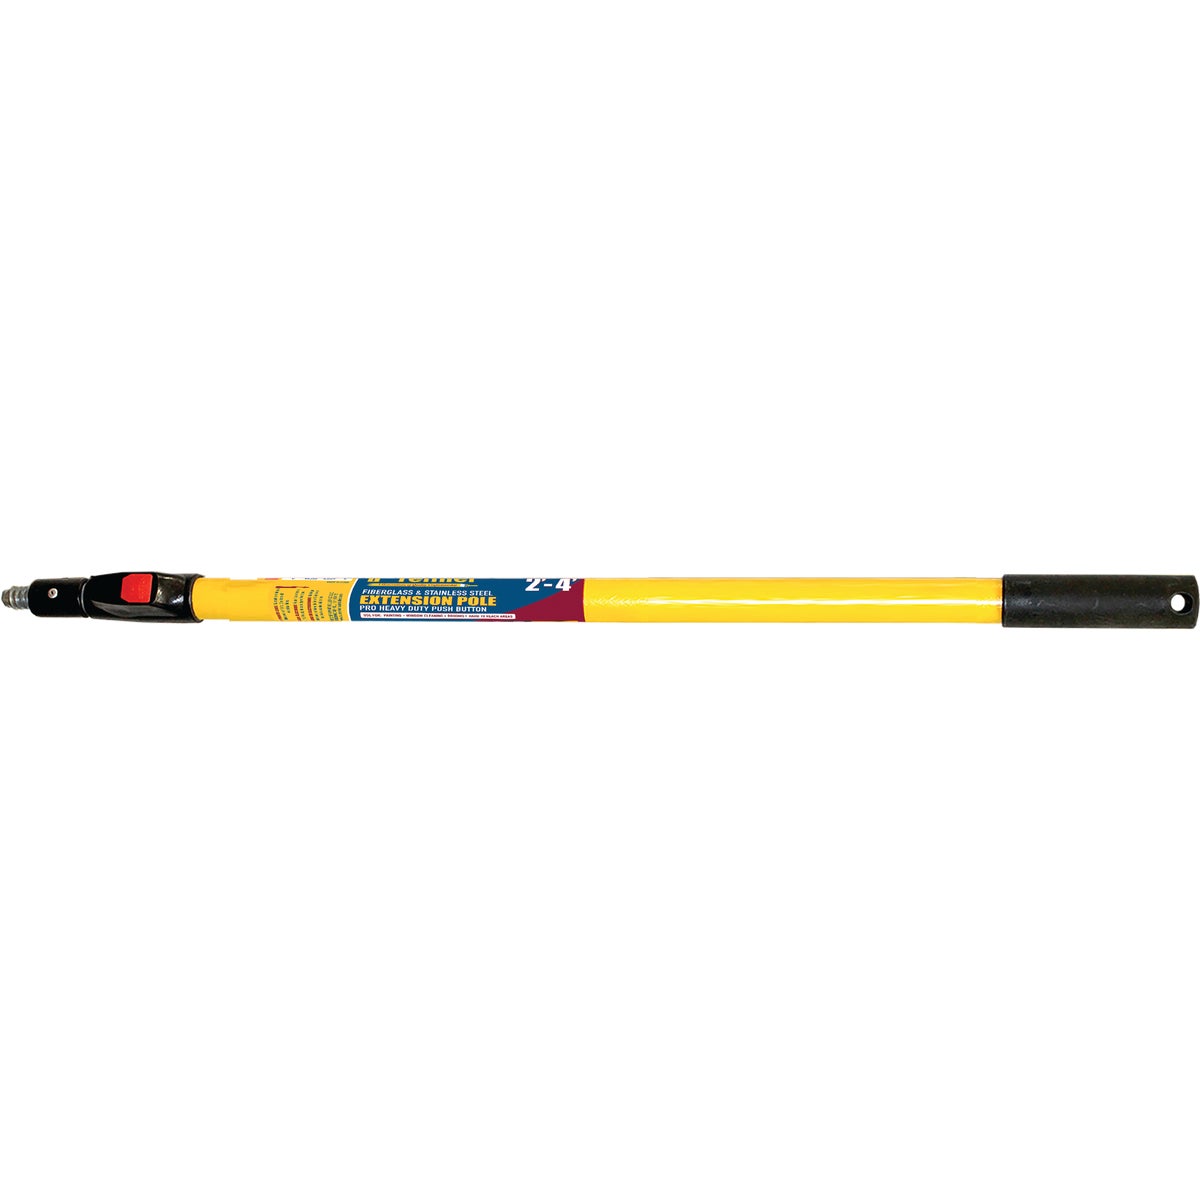 Premier 2 Ft. To 4 Ft. Telescoping Fiberglass & Stainless Steel Push Button Extension Pole